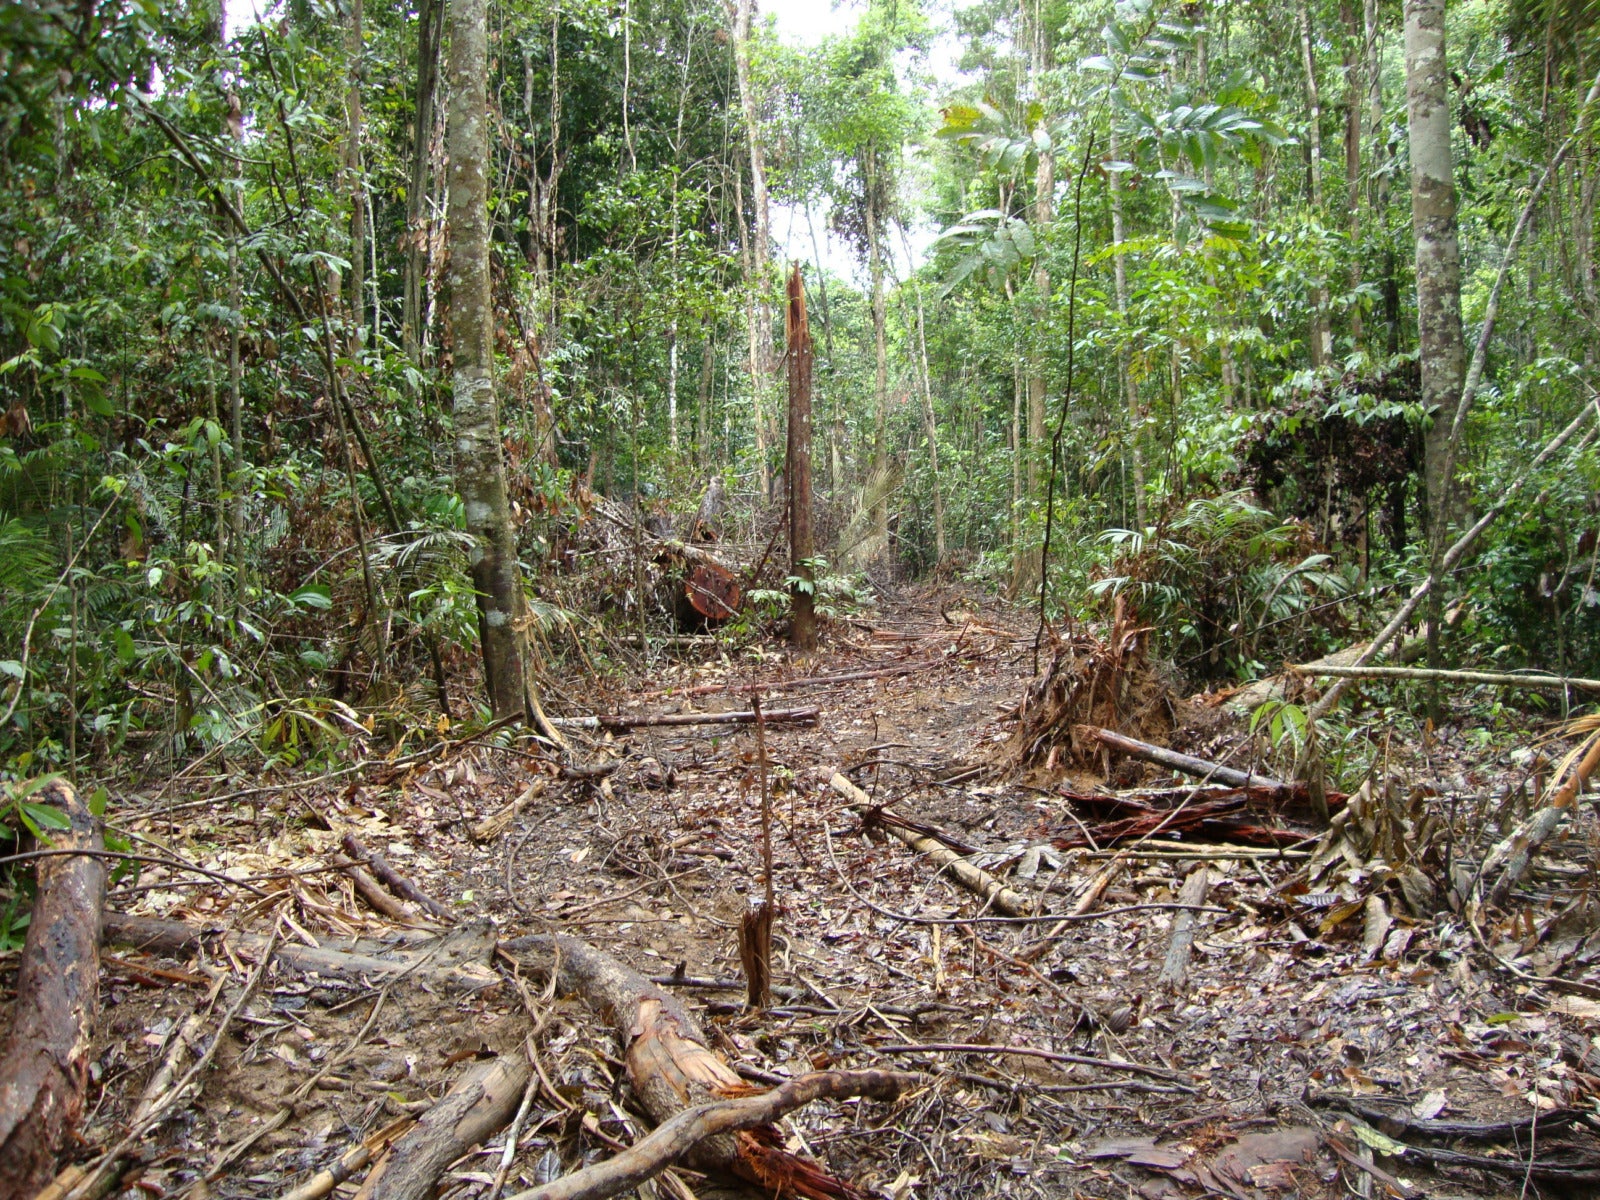 Scientists Warn The Amazon Rainforest Could Collapse in 50 Years Once It Reaches Its Breaking Point - WORLD OF BUZZ 5